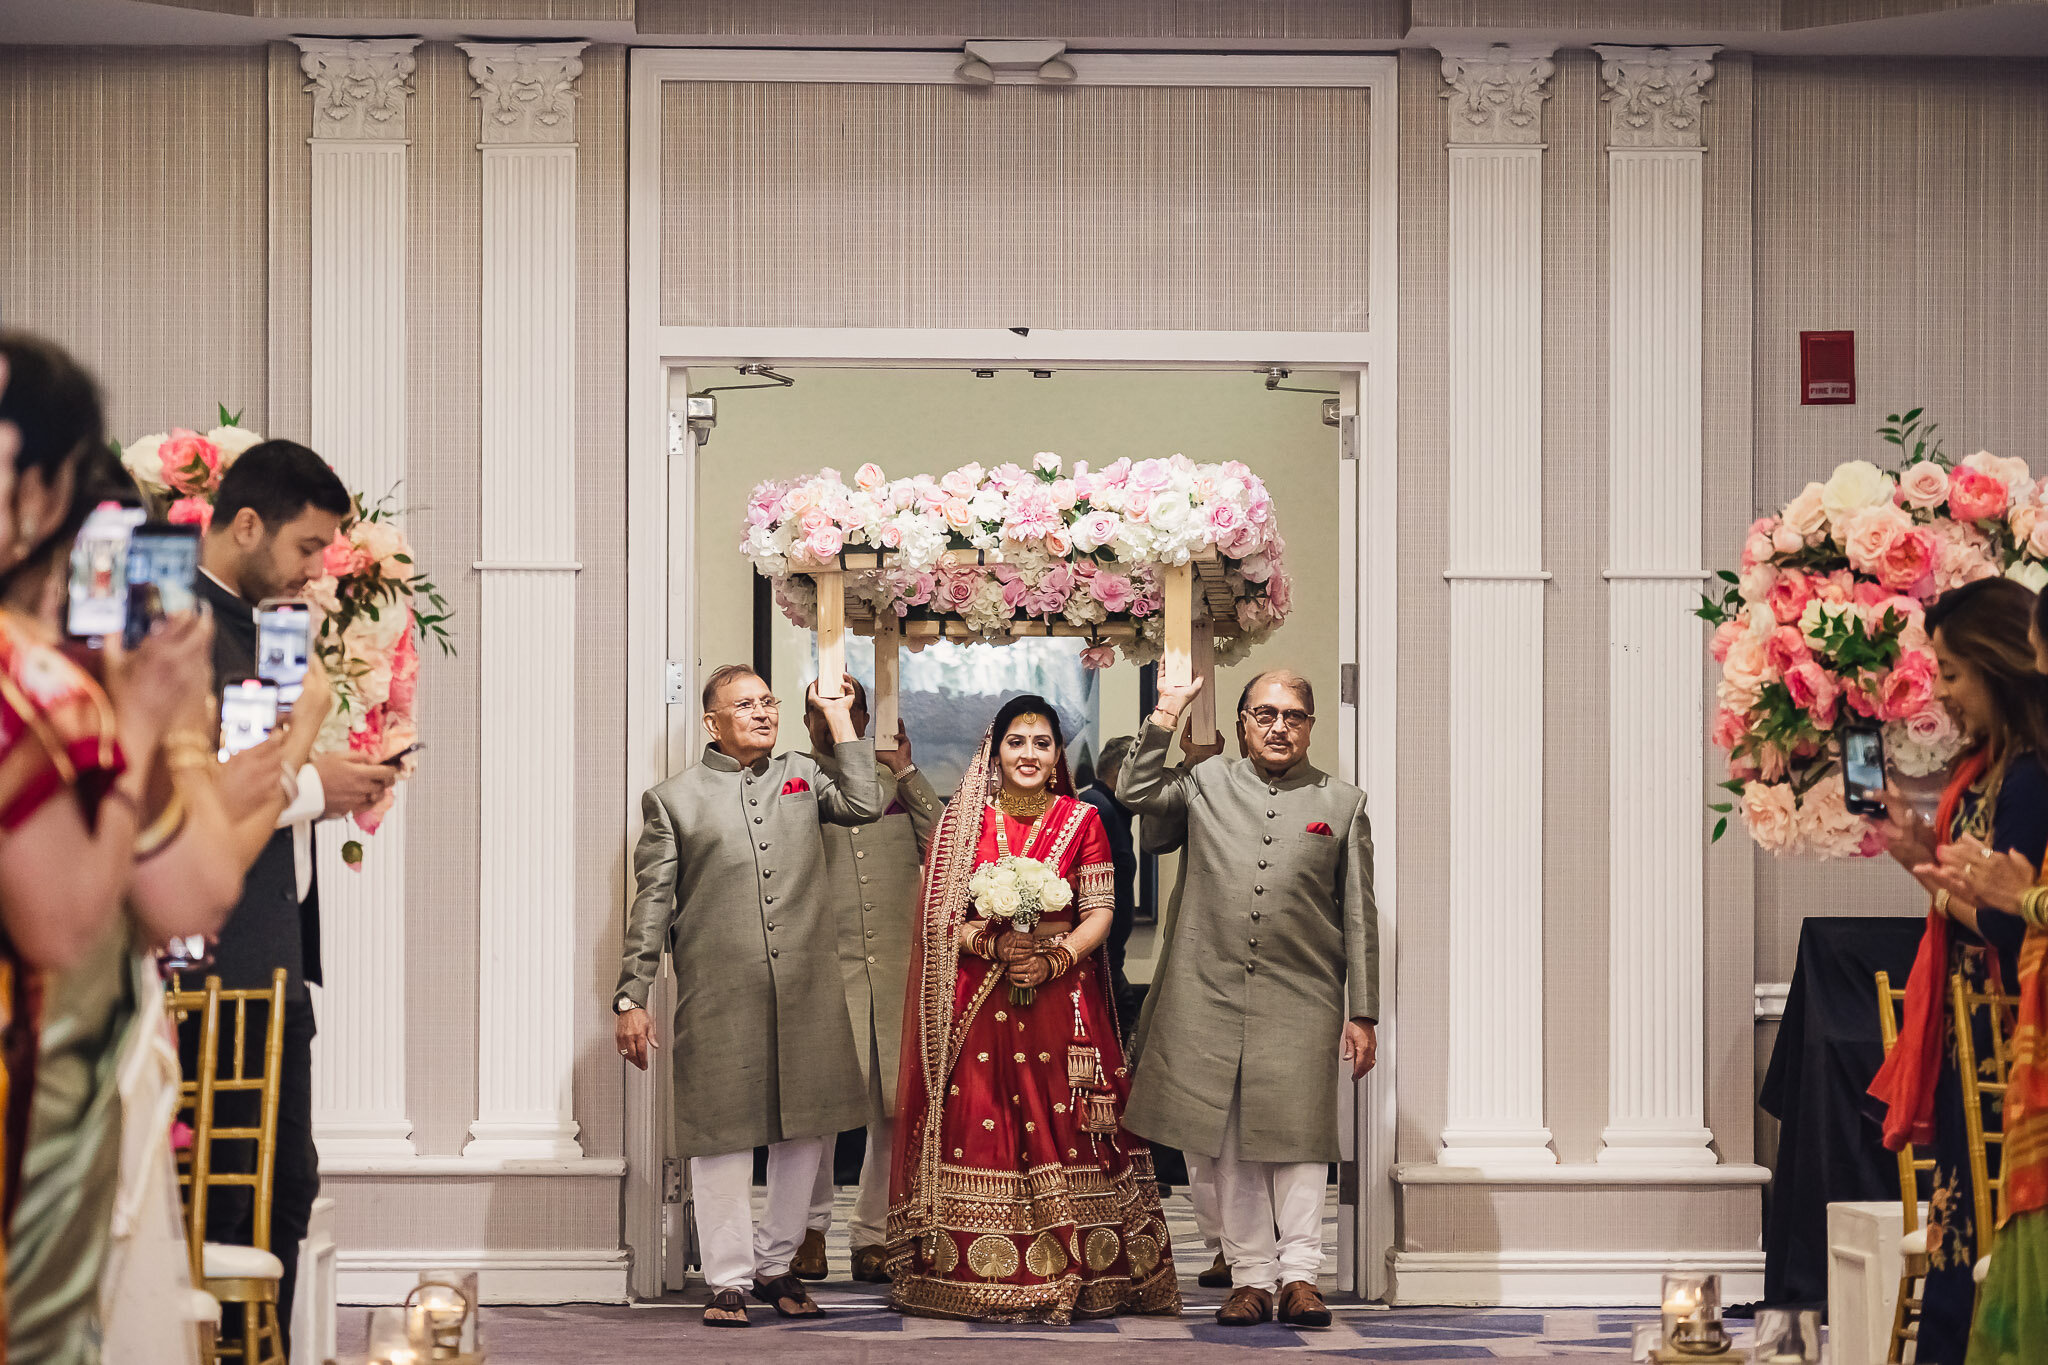 Indian bride and groom walking down the aisle during wedding ceremony